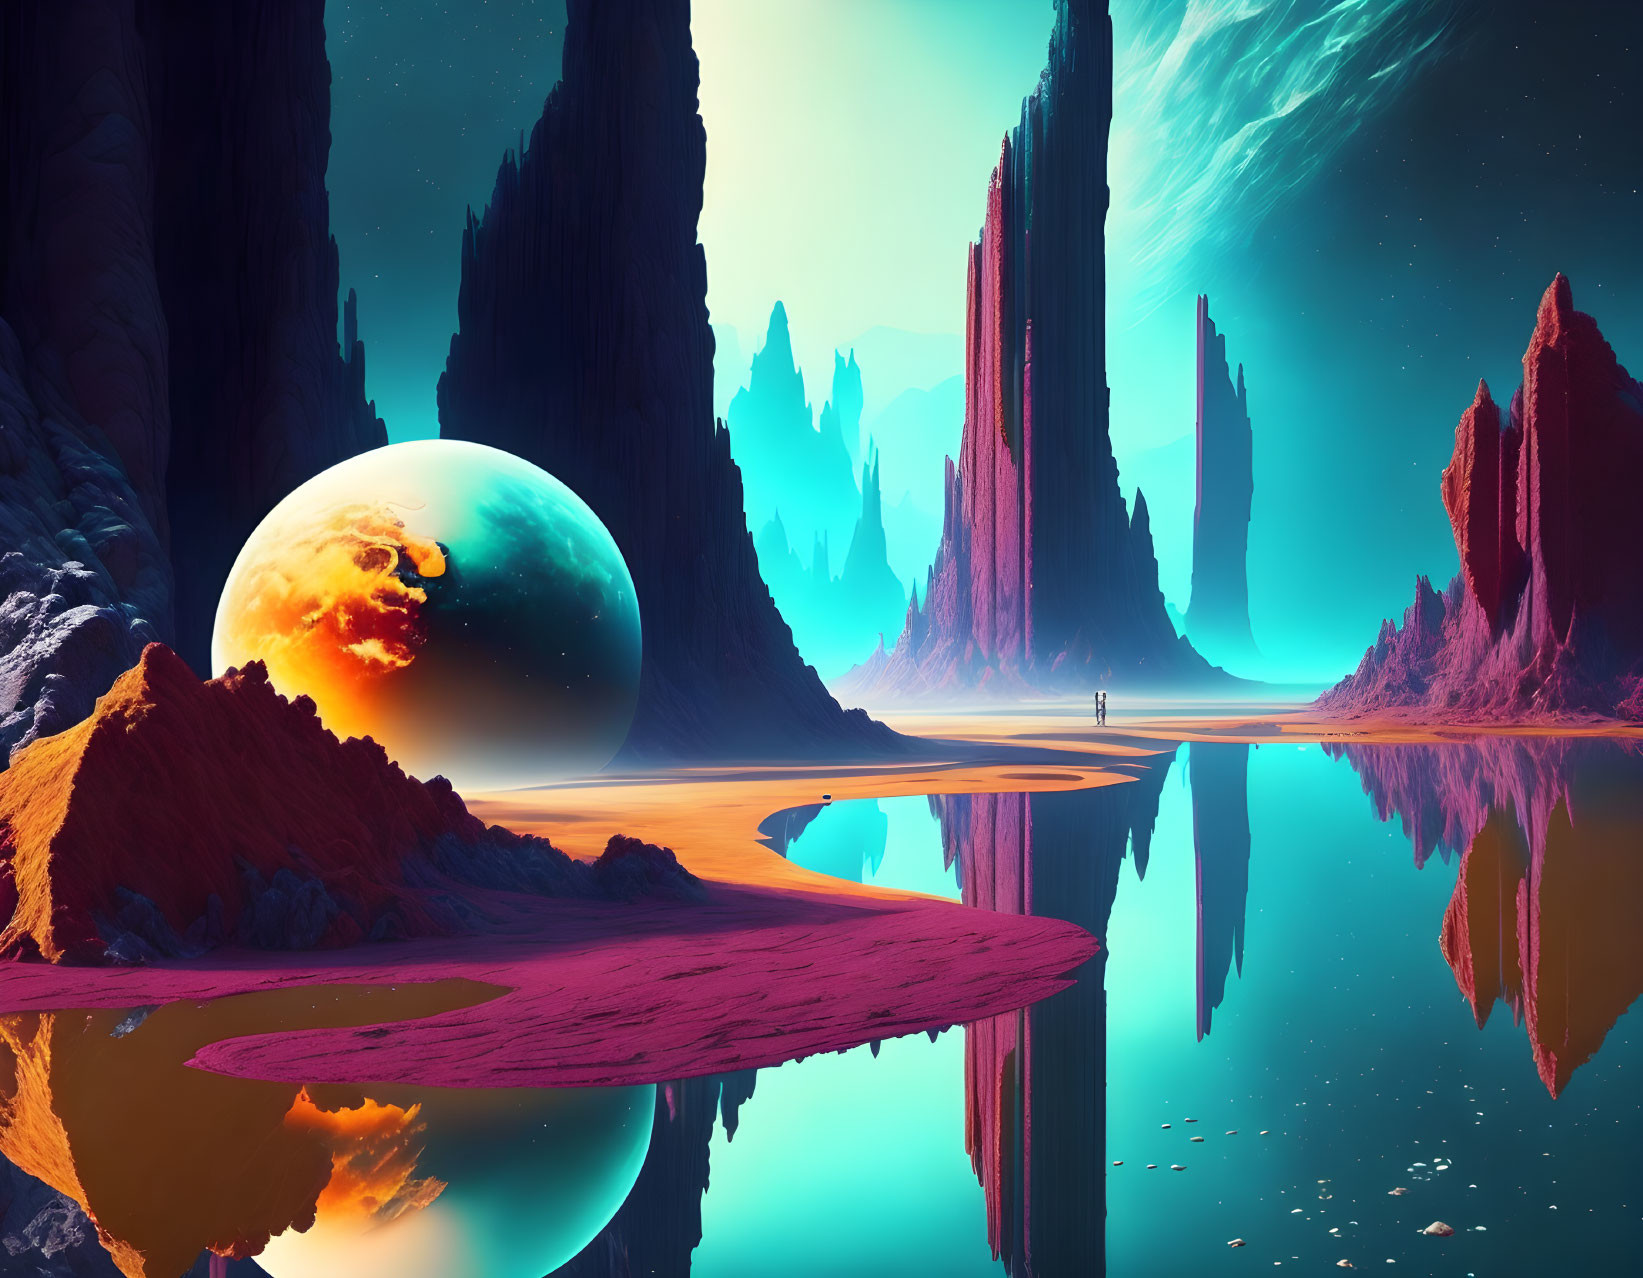 Person standing between towering rock formations on vibrant alien world